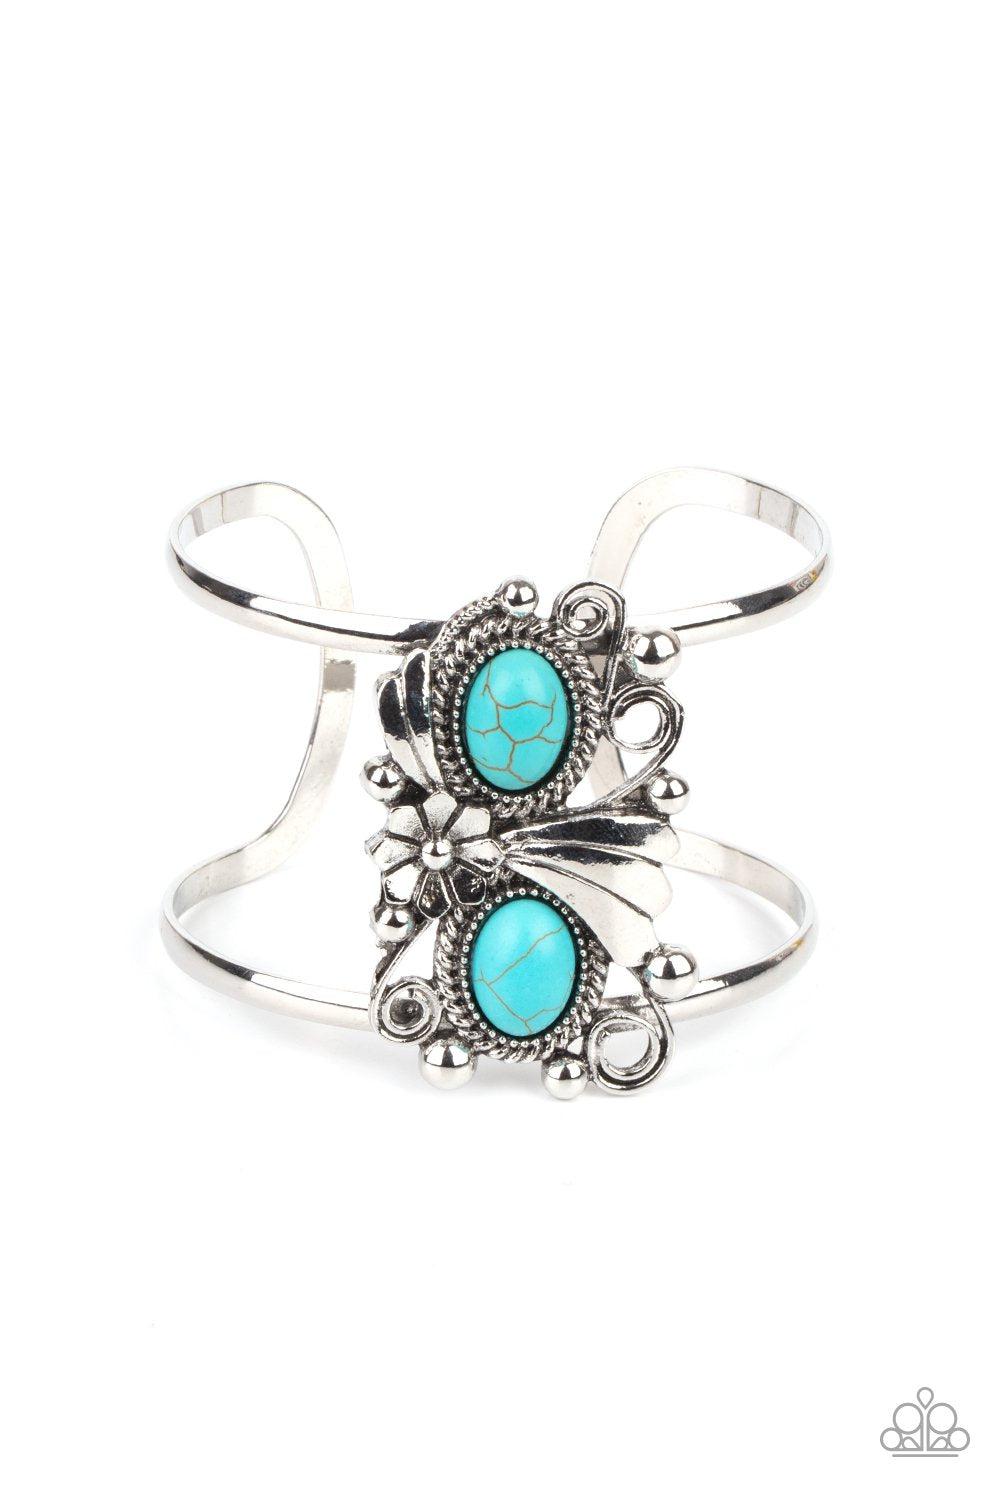 Mojave Flower Girl Turquoise Blue Stone Flower Cuff Bracelet - Paparazzi Accessories- lightbox - CarasShop.com - $5 Jewelry by Cara Jewels